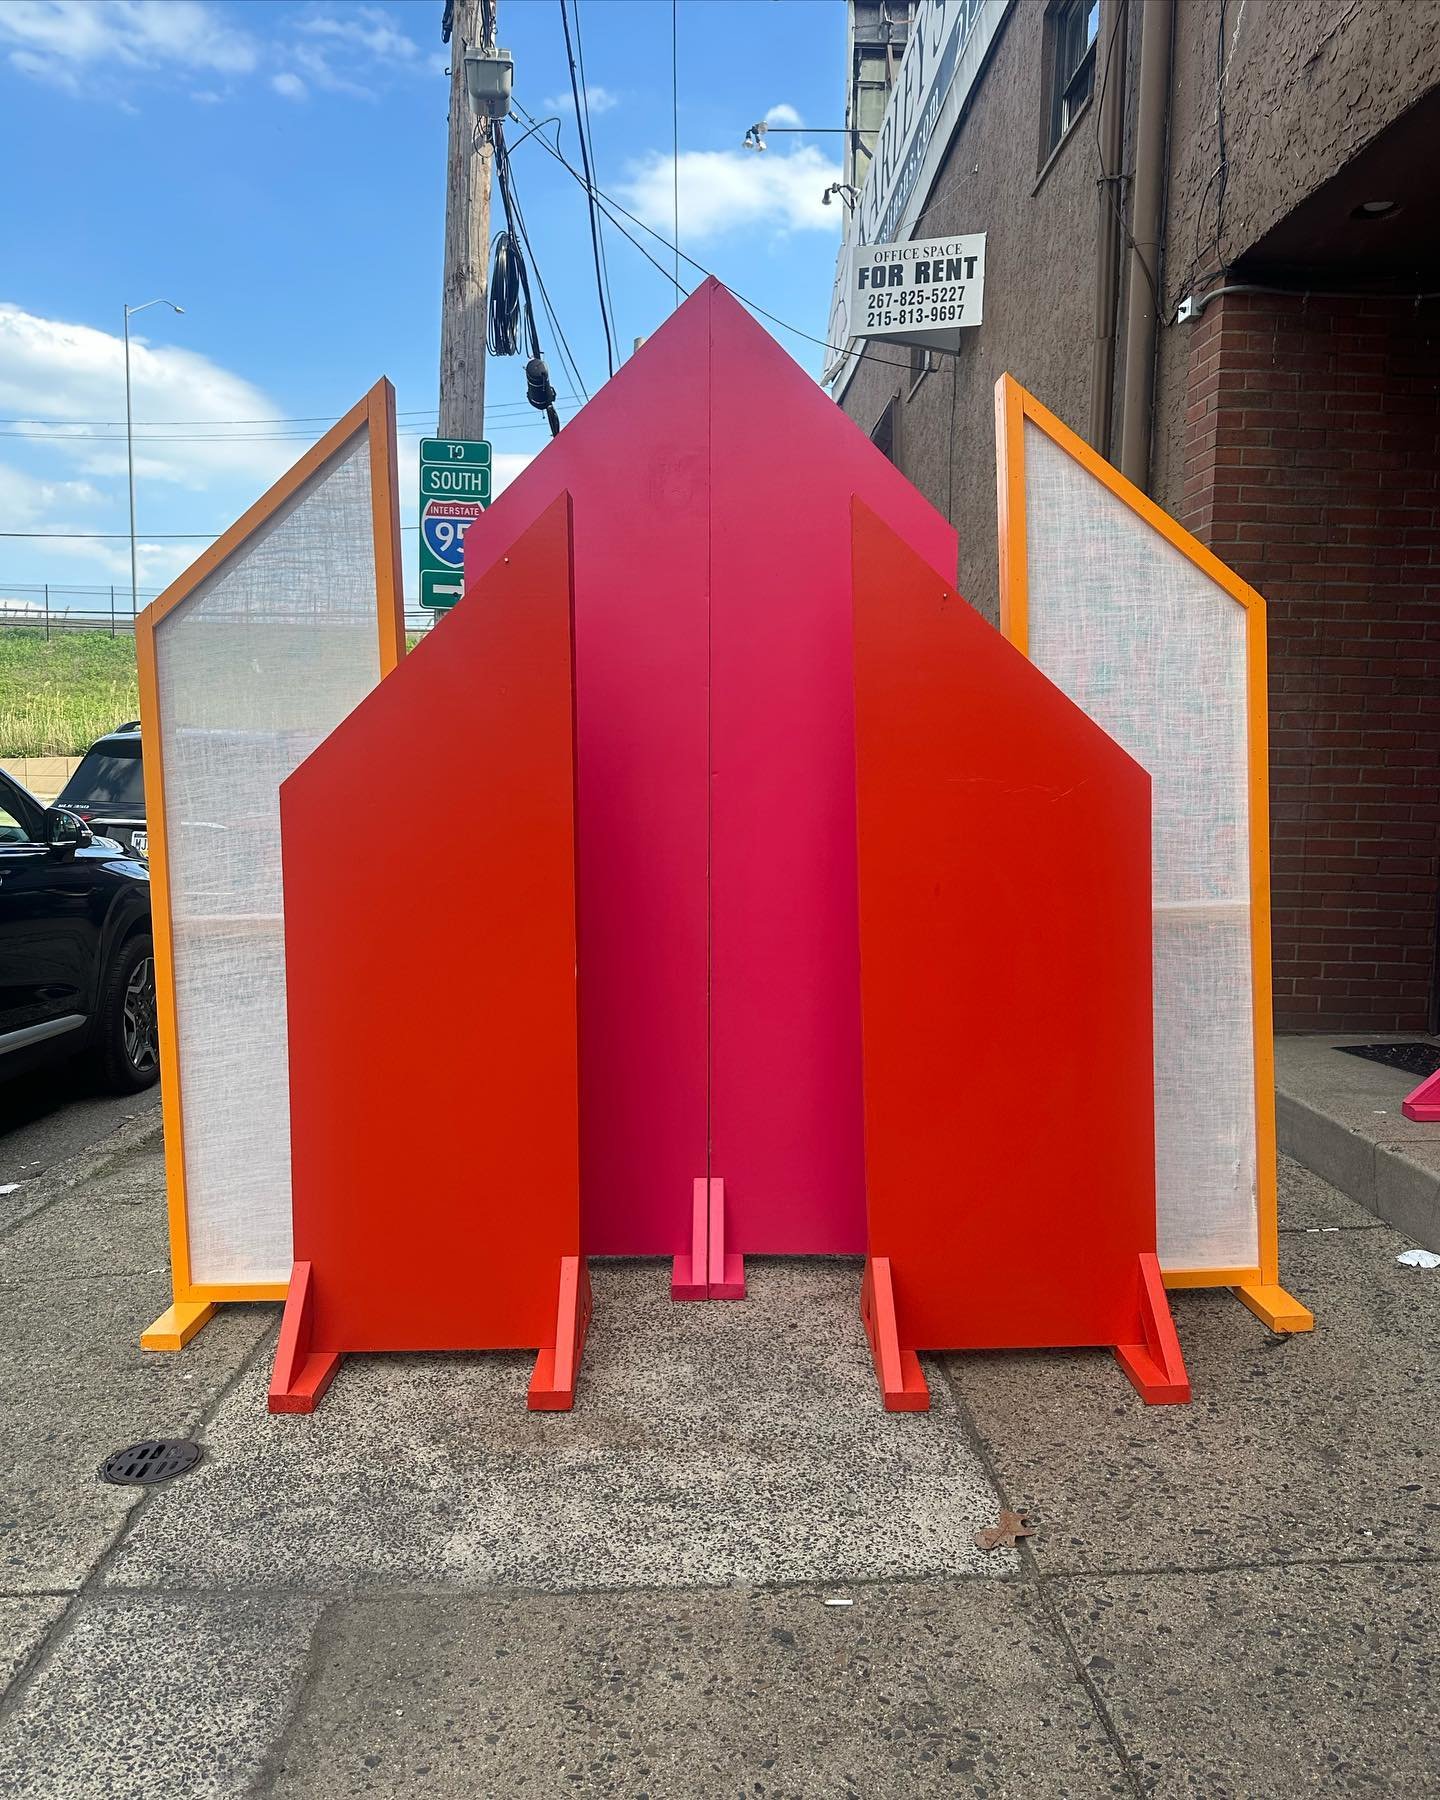 Triangle Arches - Set of 6
Available for rent now.  Mix &amp; match any paint colors you would like. 
Size: Large 7&rsquo;x2&rsquo; &amp; Mediums 6&rsquo;x2&rsquo;
Total for the set - $350
&mdash;&mdash;&mdash;&mdash;&mdash;
Karley&rsquo;s+ members r